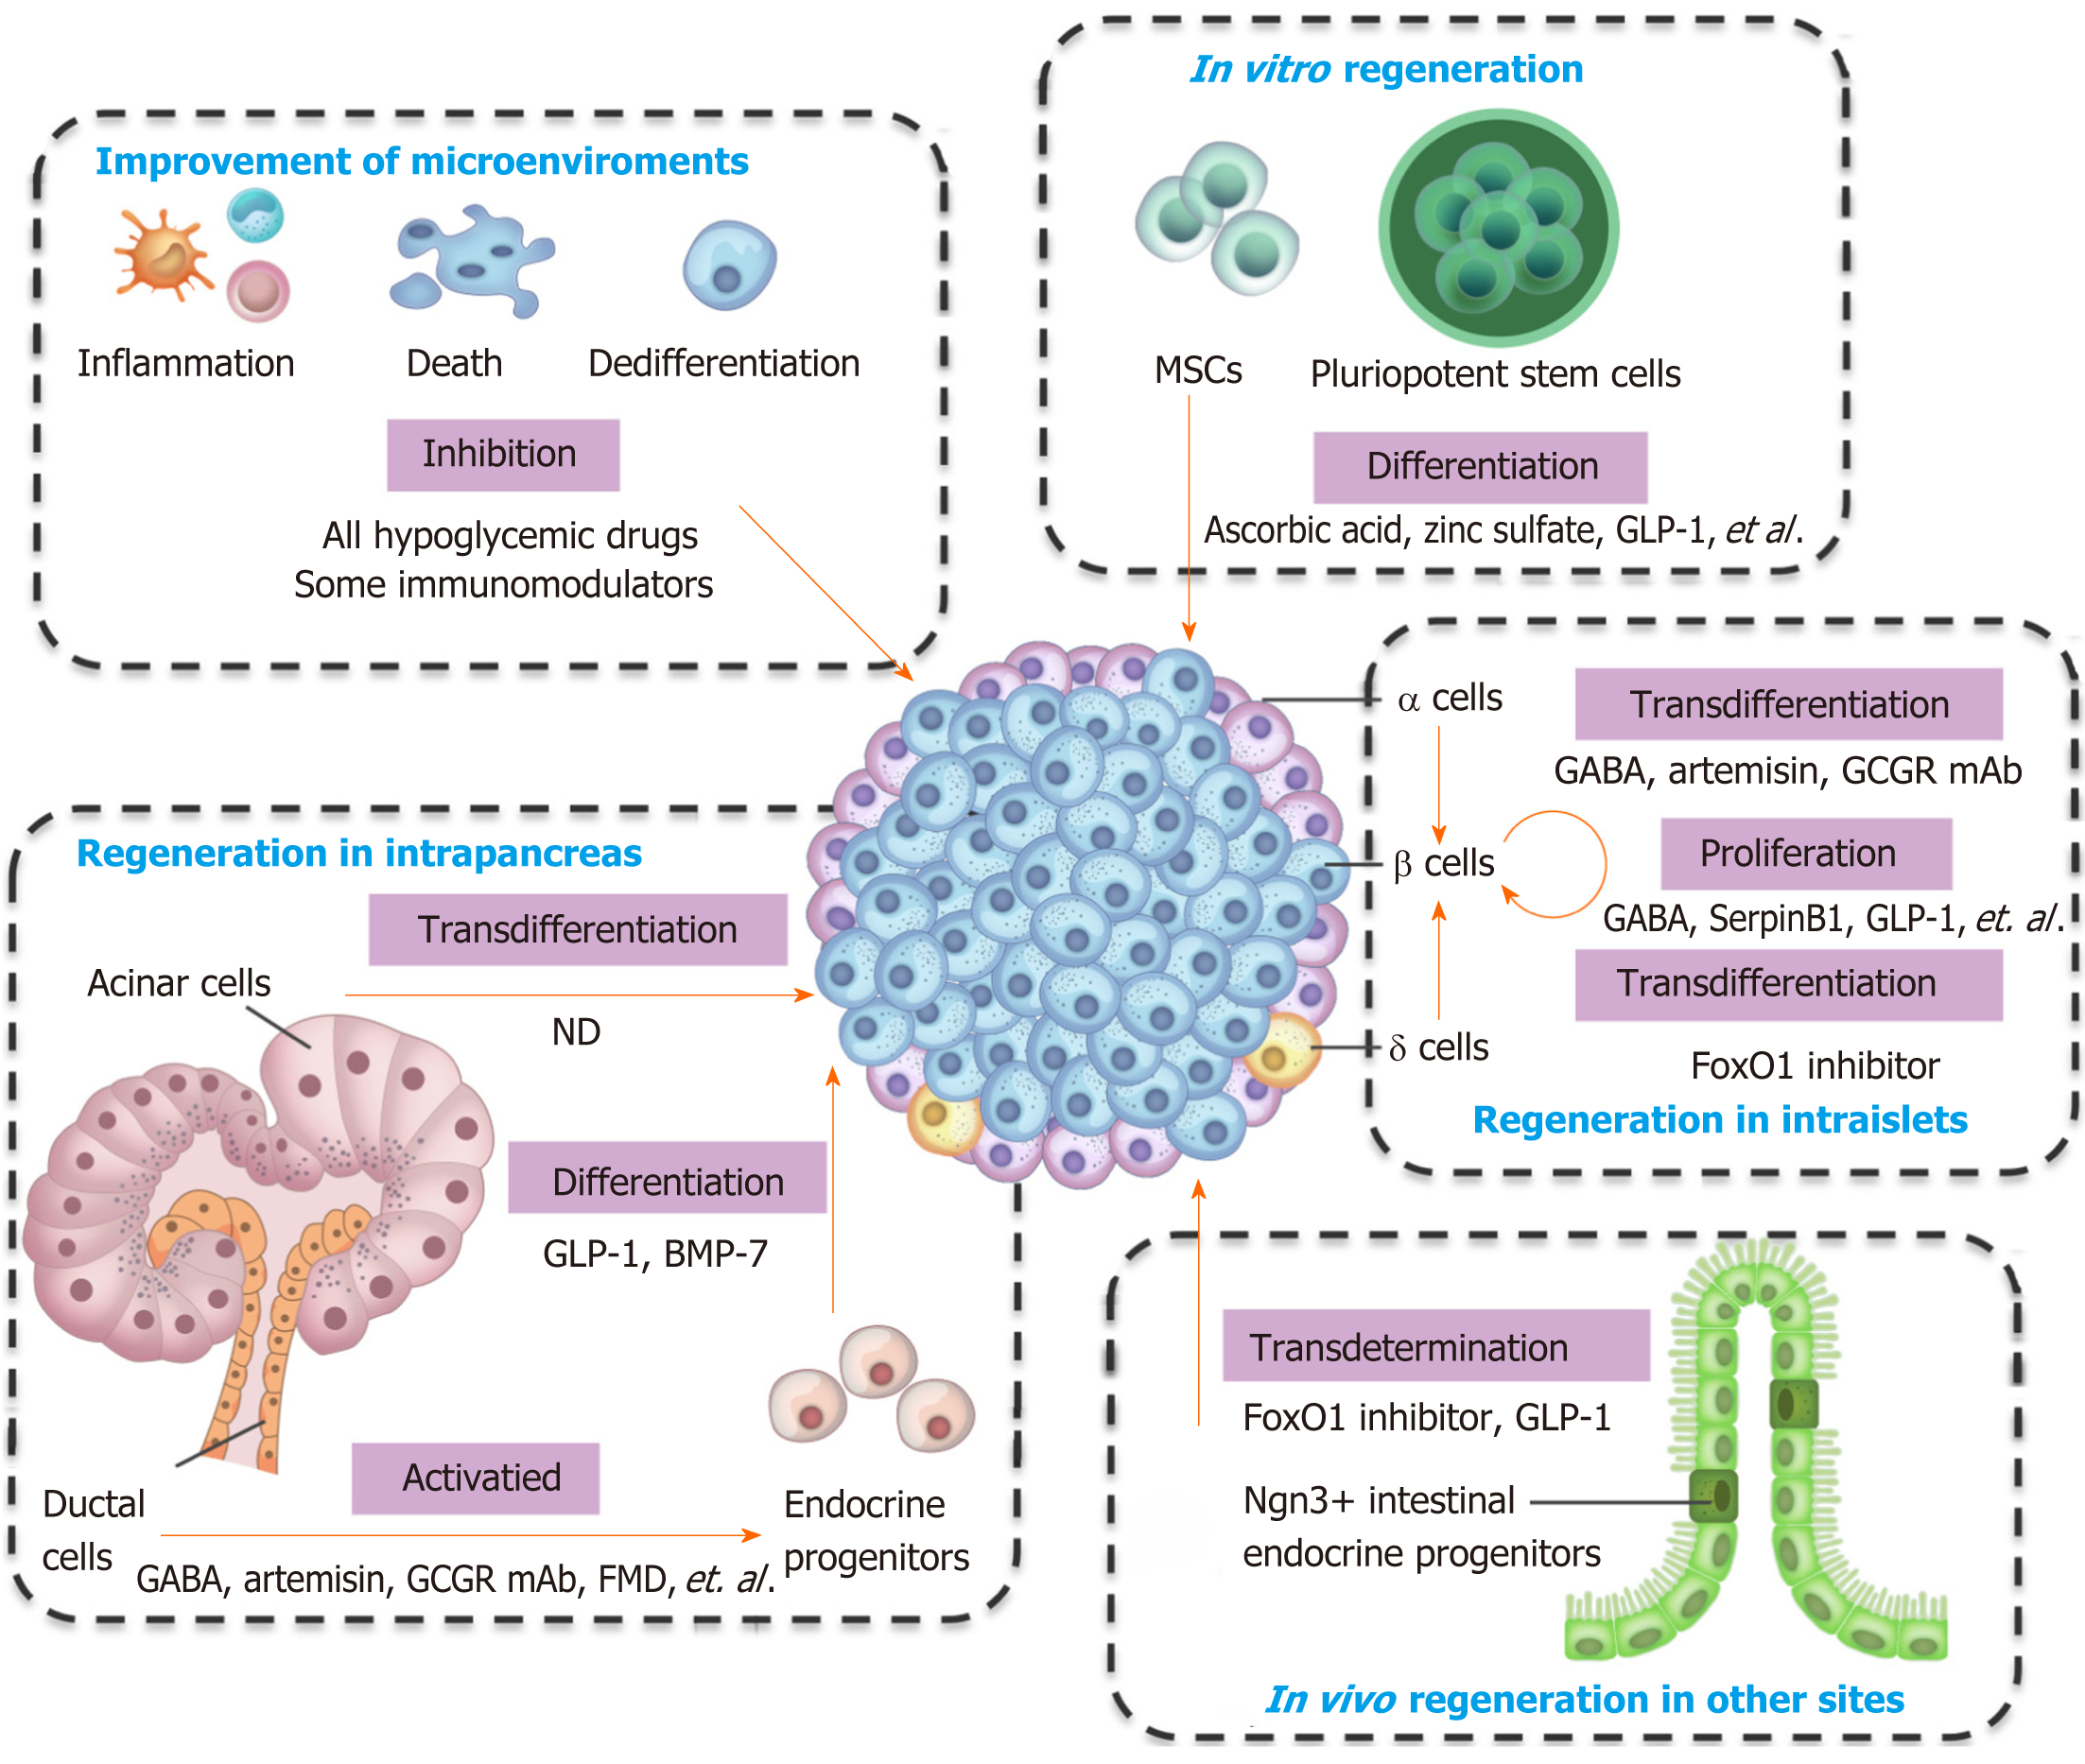 Pancreatic β cell regeneration induced by clinical and preclinical